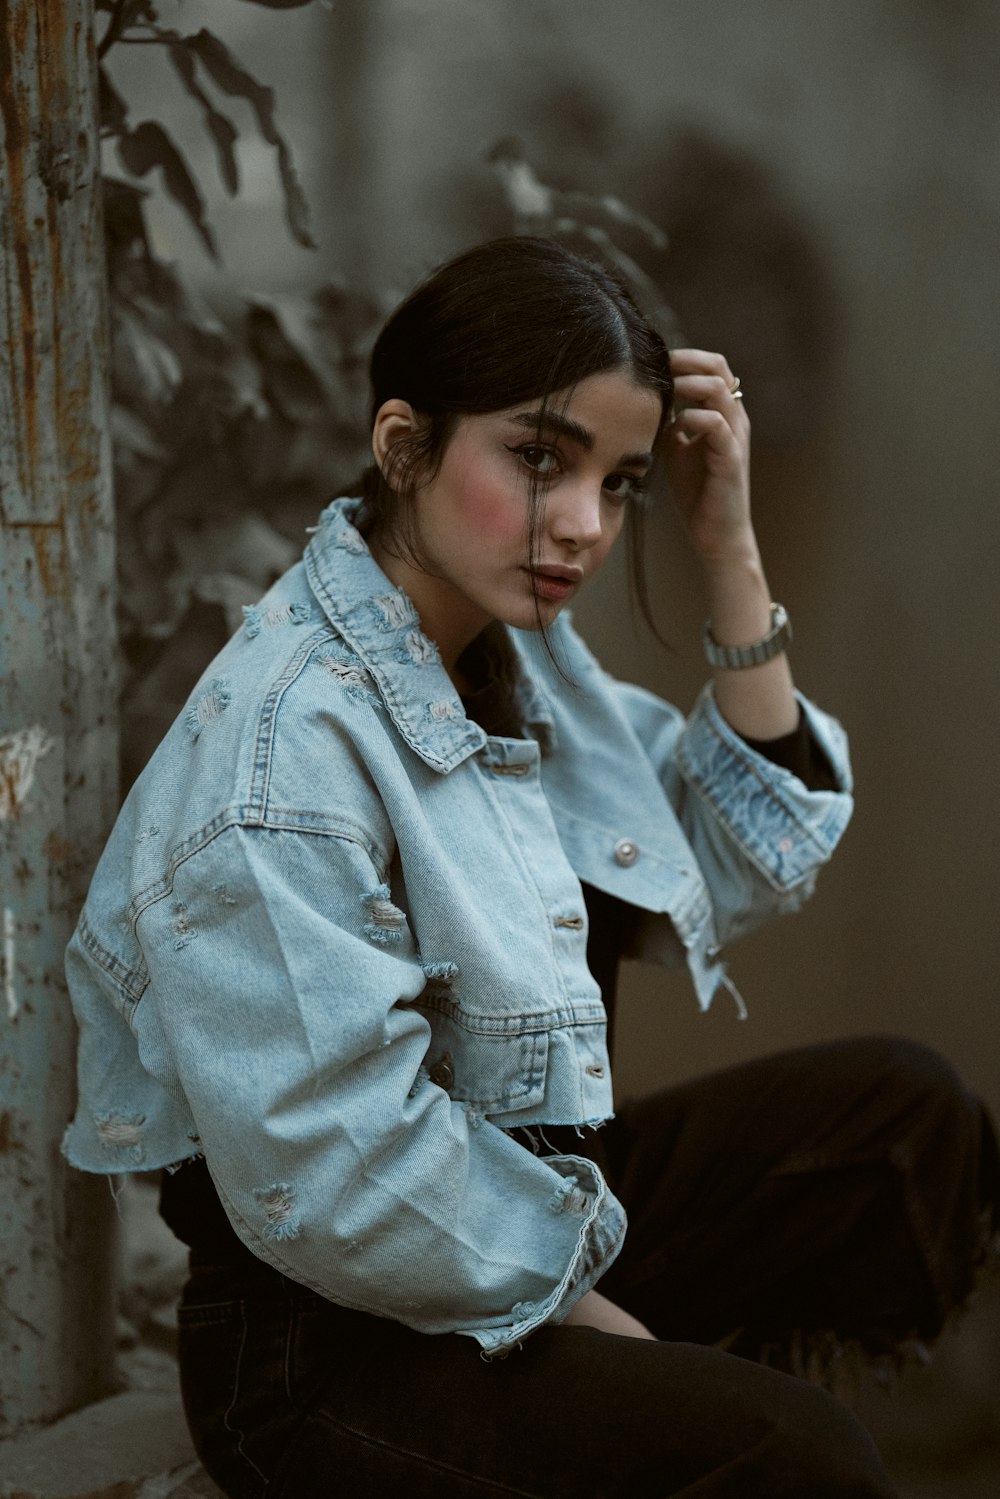 a woman sitting on the ground wearing a jean jacket